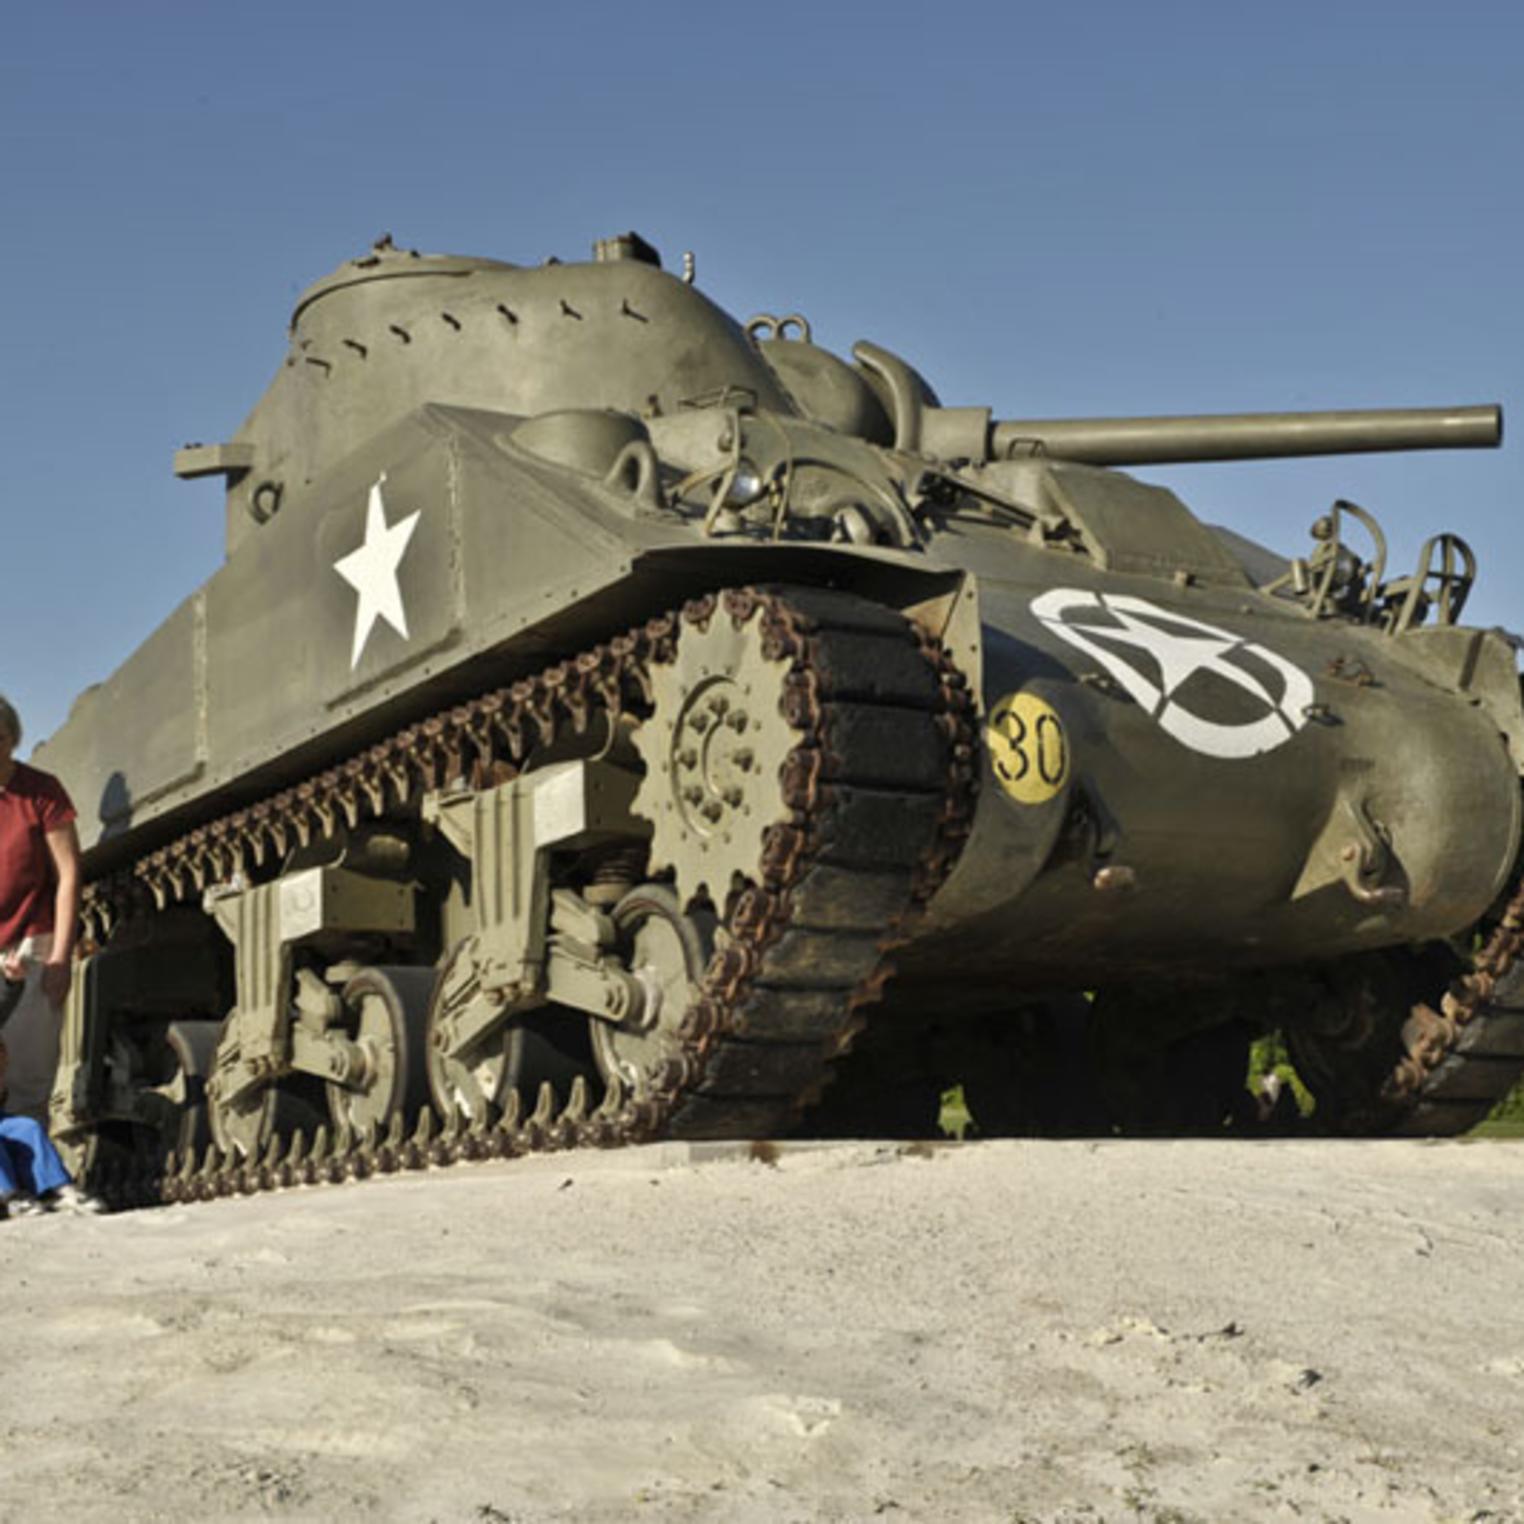 Tank at U.S. Army Heritage & Education Center